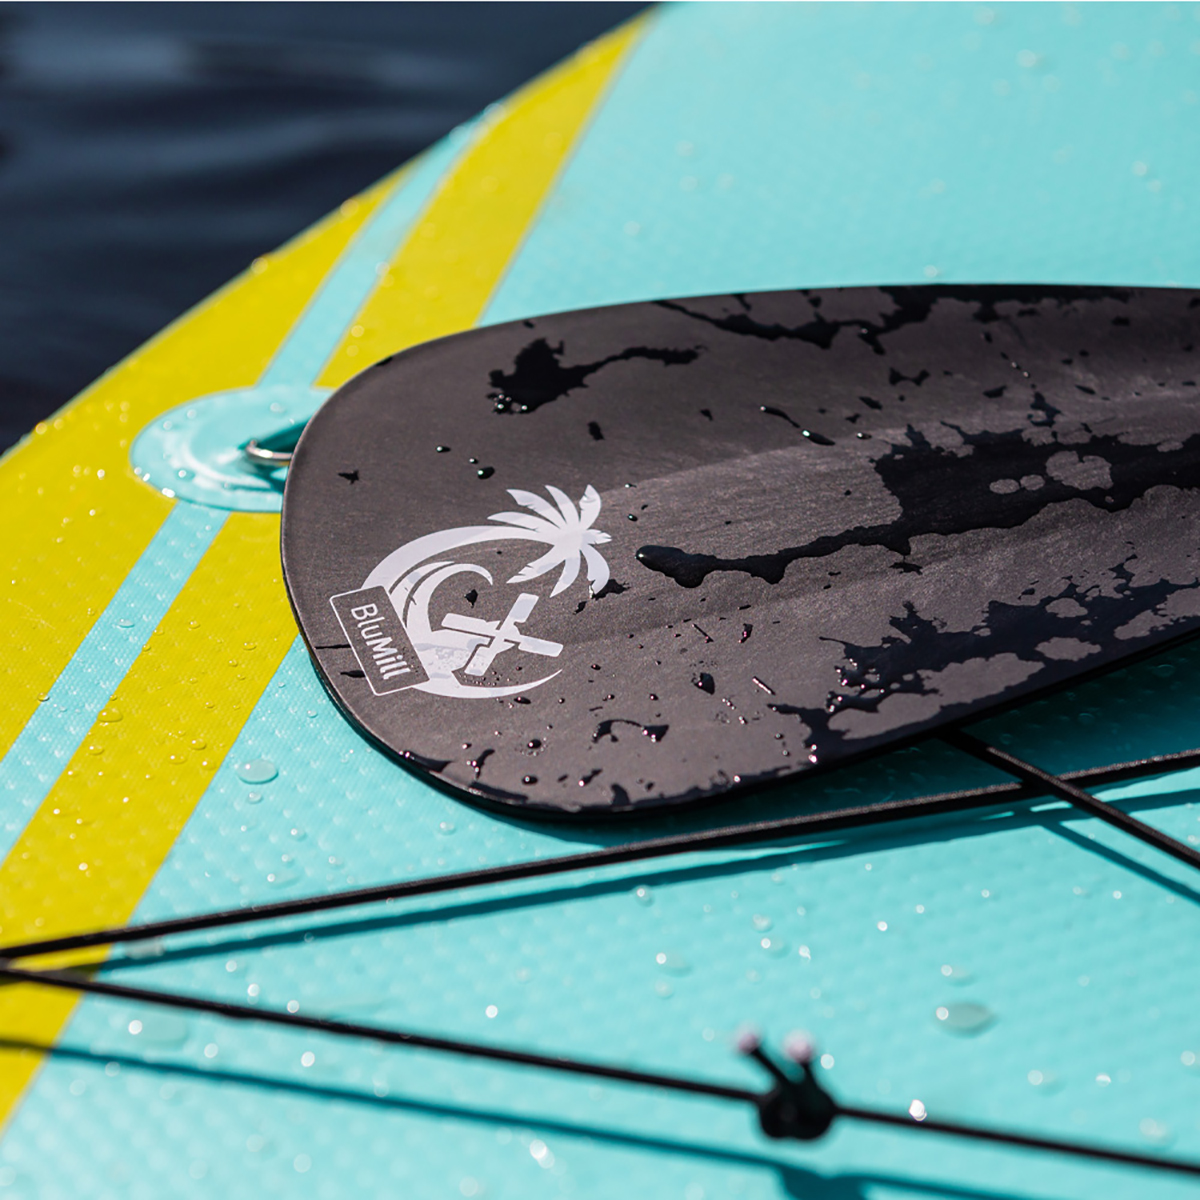 Blau Outdoor Up BLUMILL Board, Stand Paddle